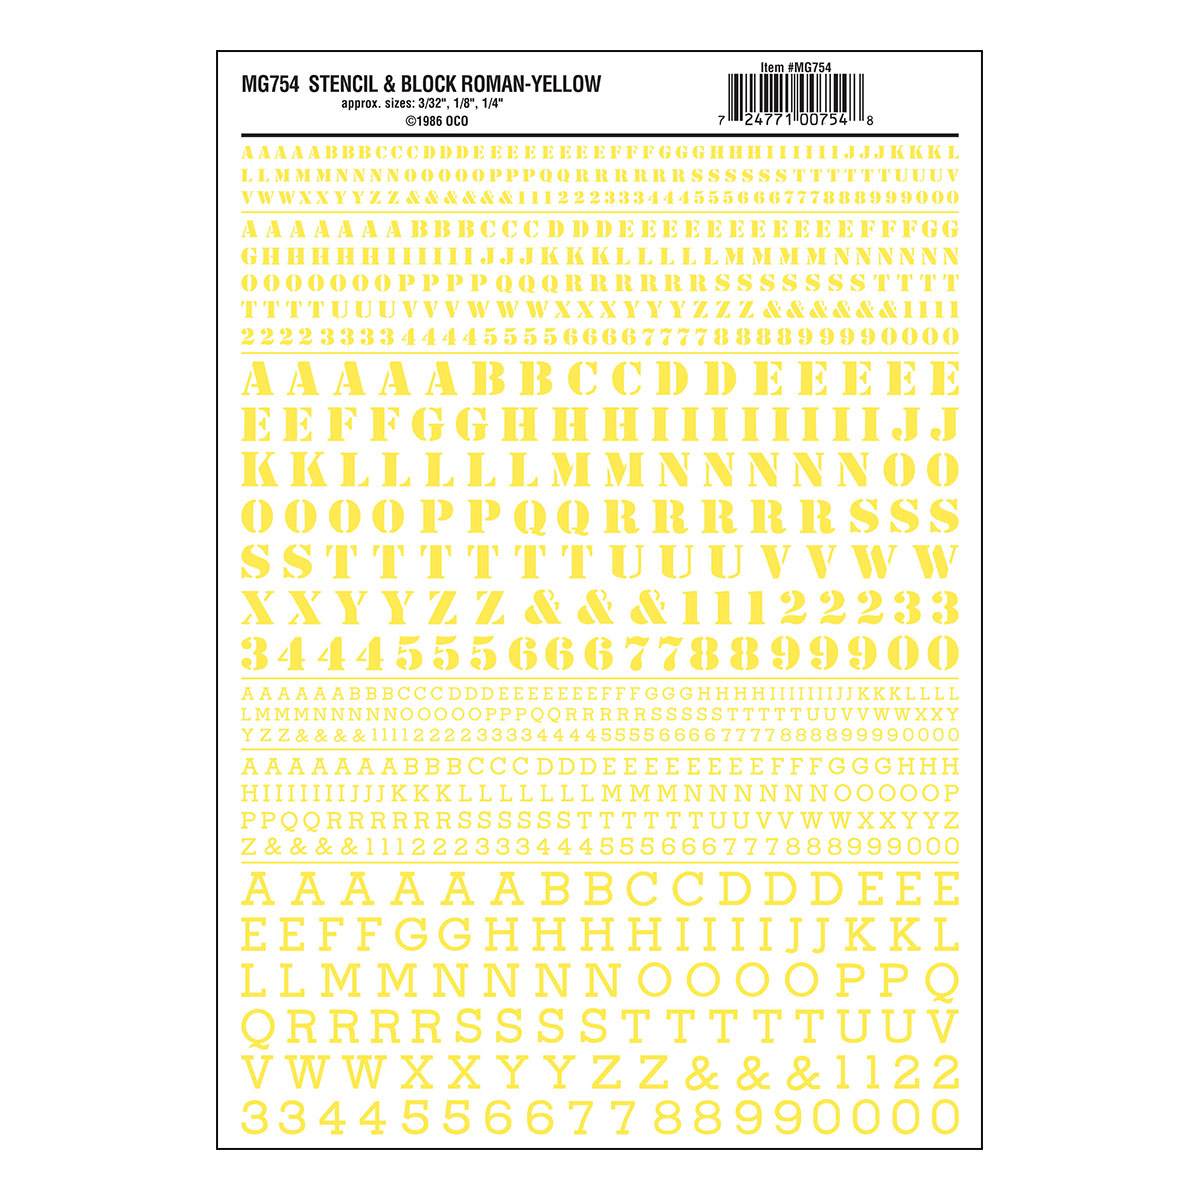 Stencil & Block Roman Yellow - Package contains one sheet: 5 5/8" x 8 1/4" (14